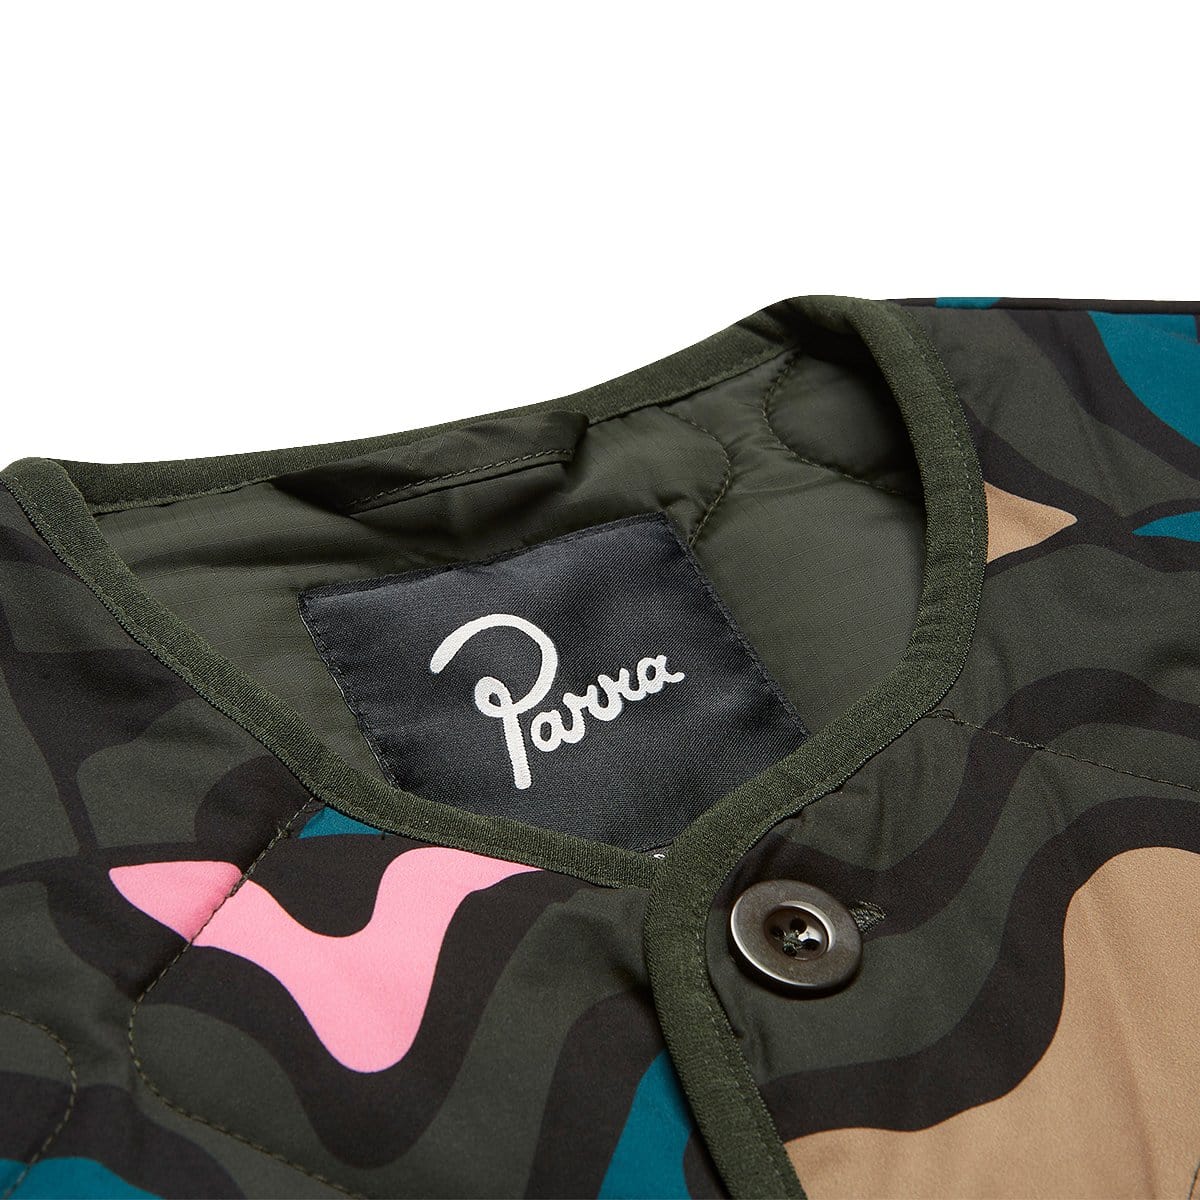 By Parra Outerwear GEM STONE PATTERN QUILTED JACKET